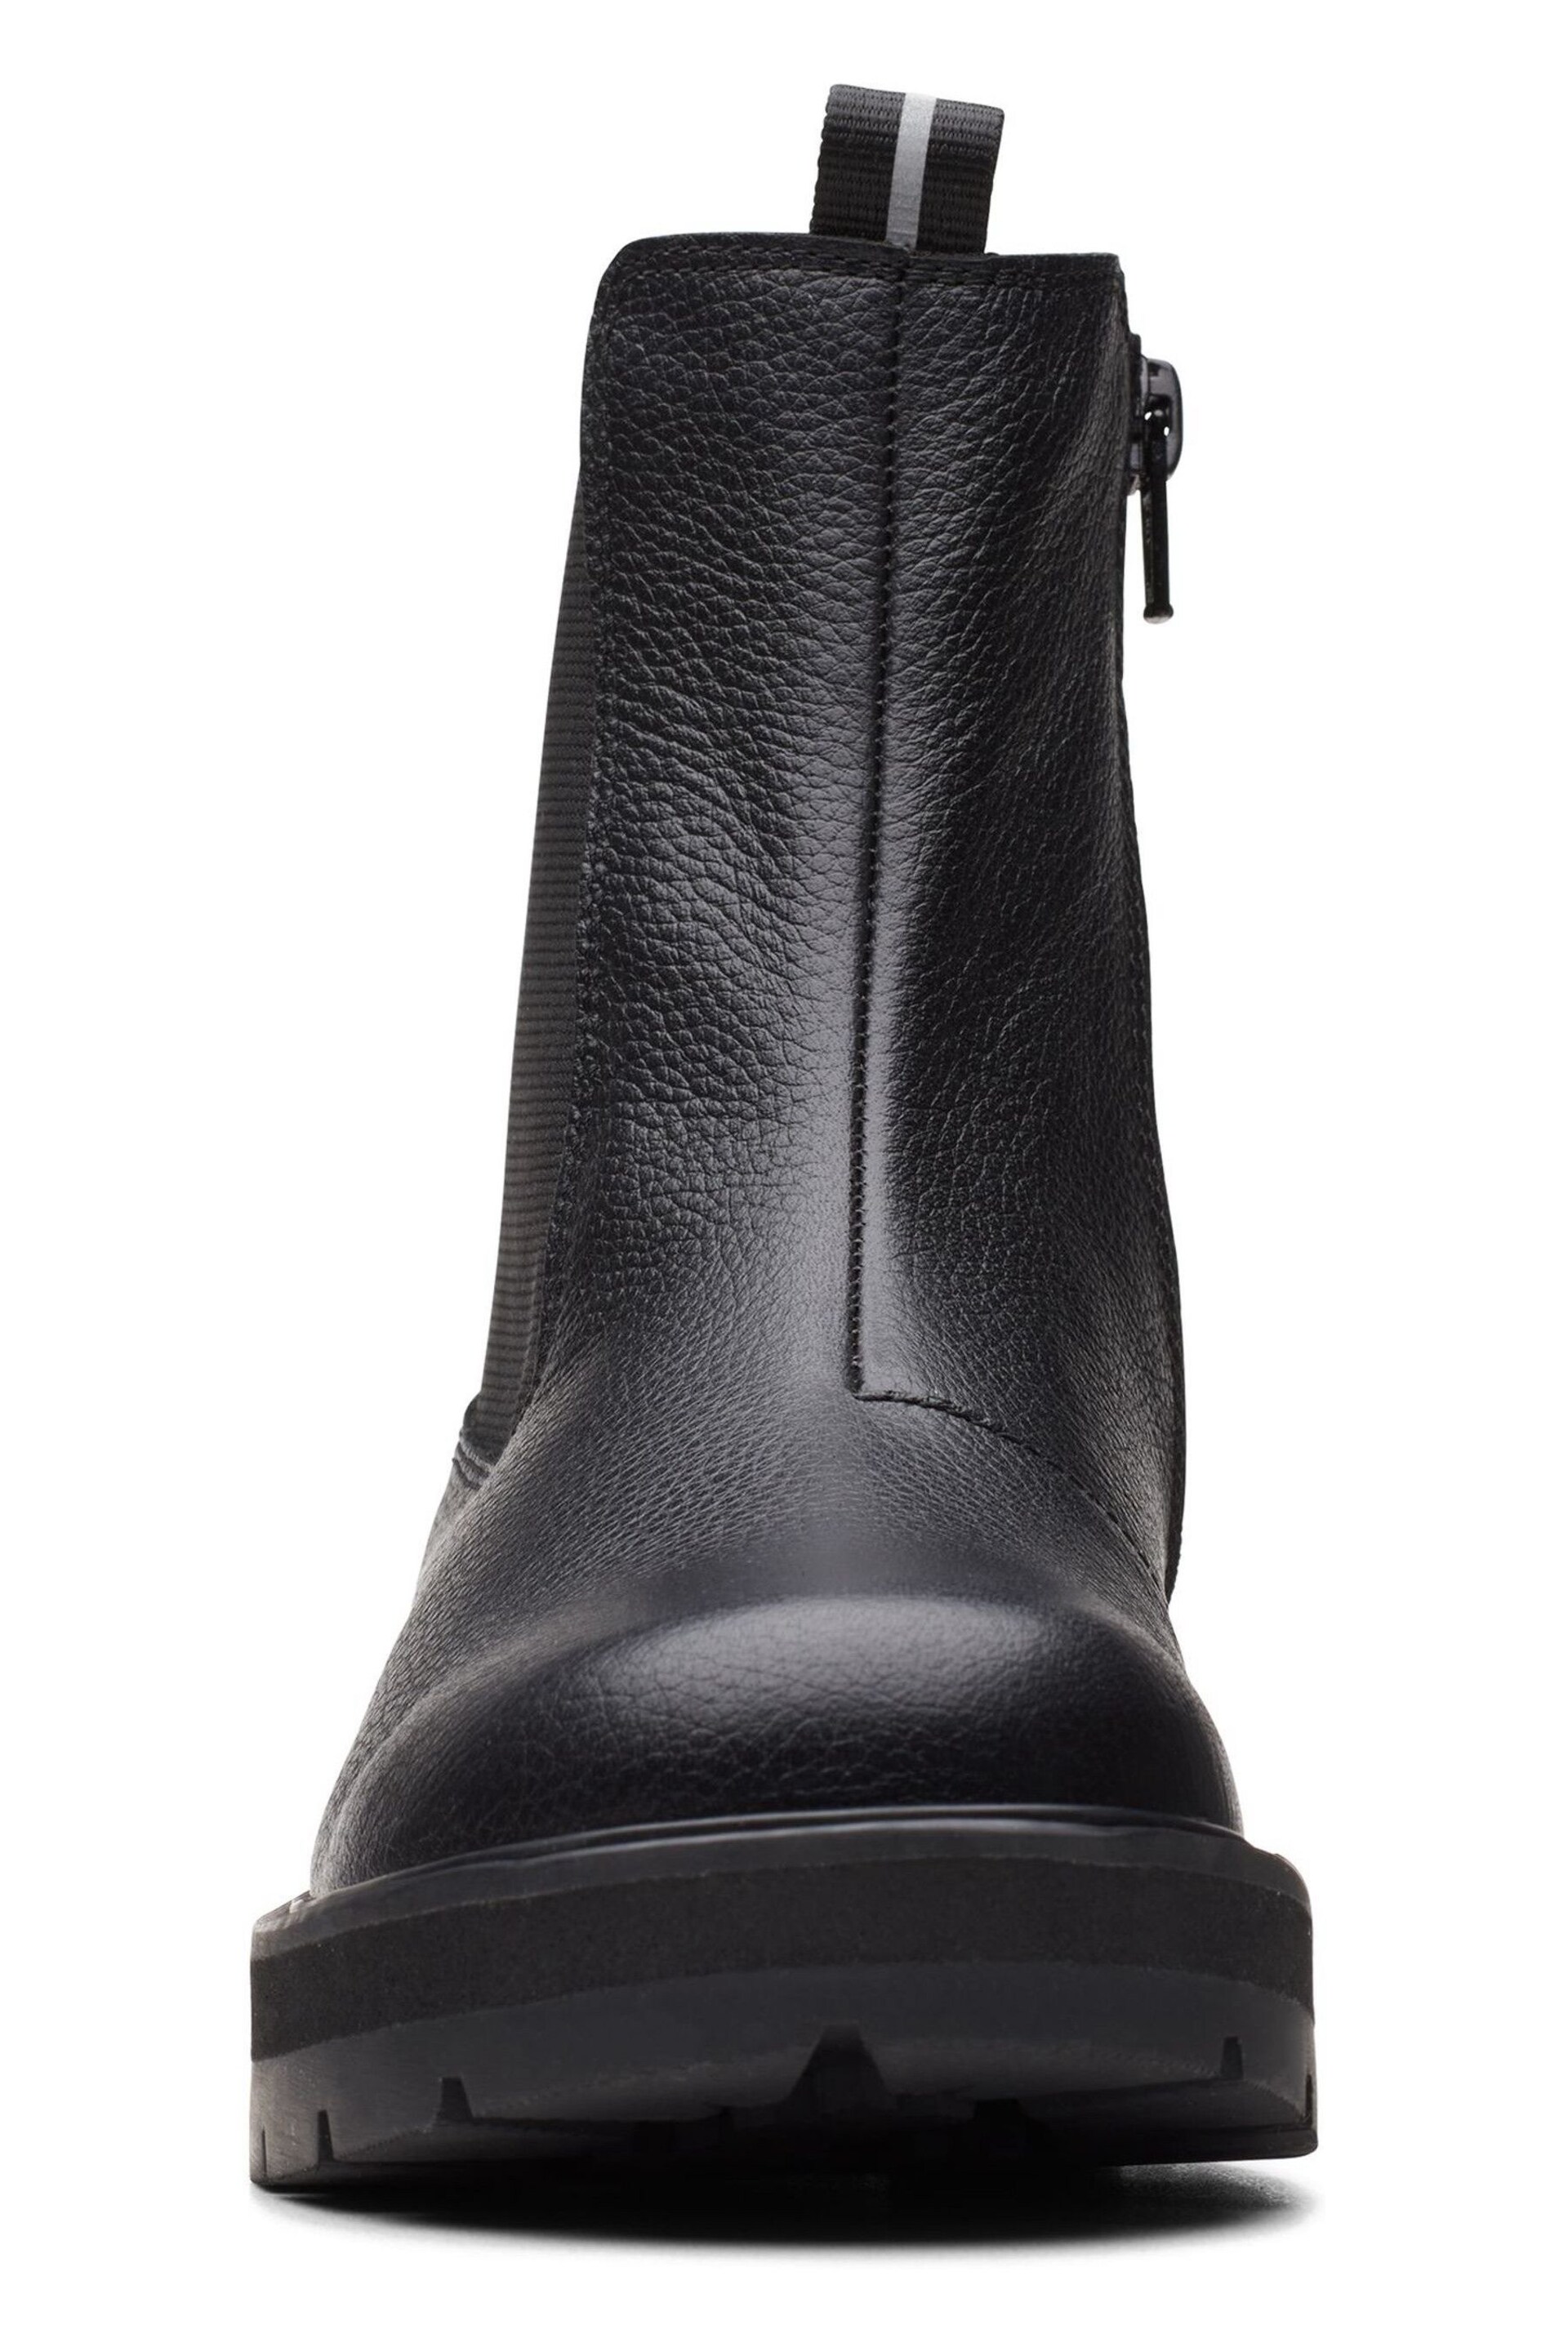 Clarks Black Multi Fit Youth Prague Boots - Image 5 of 7